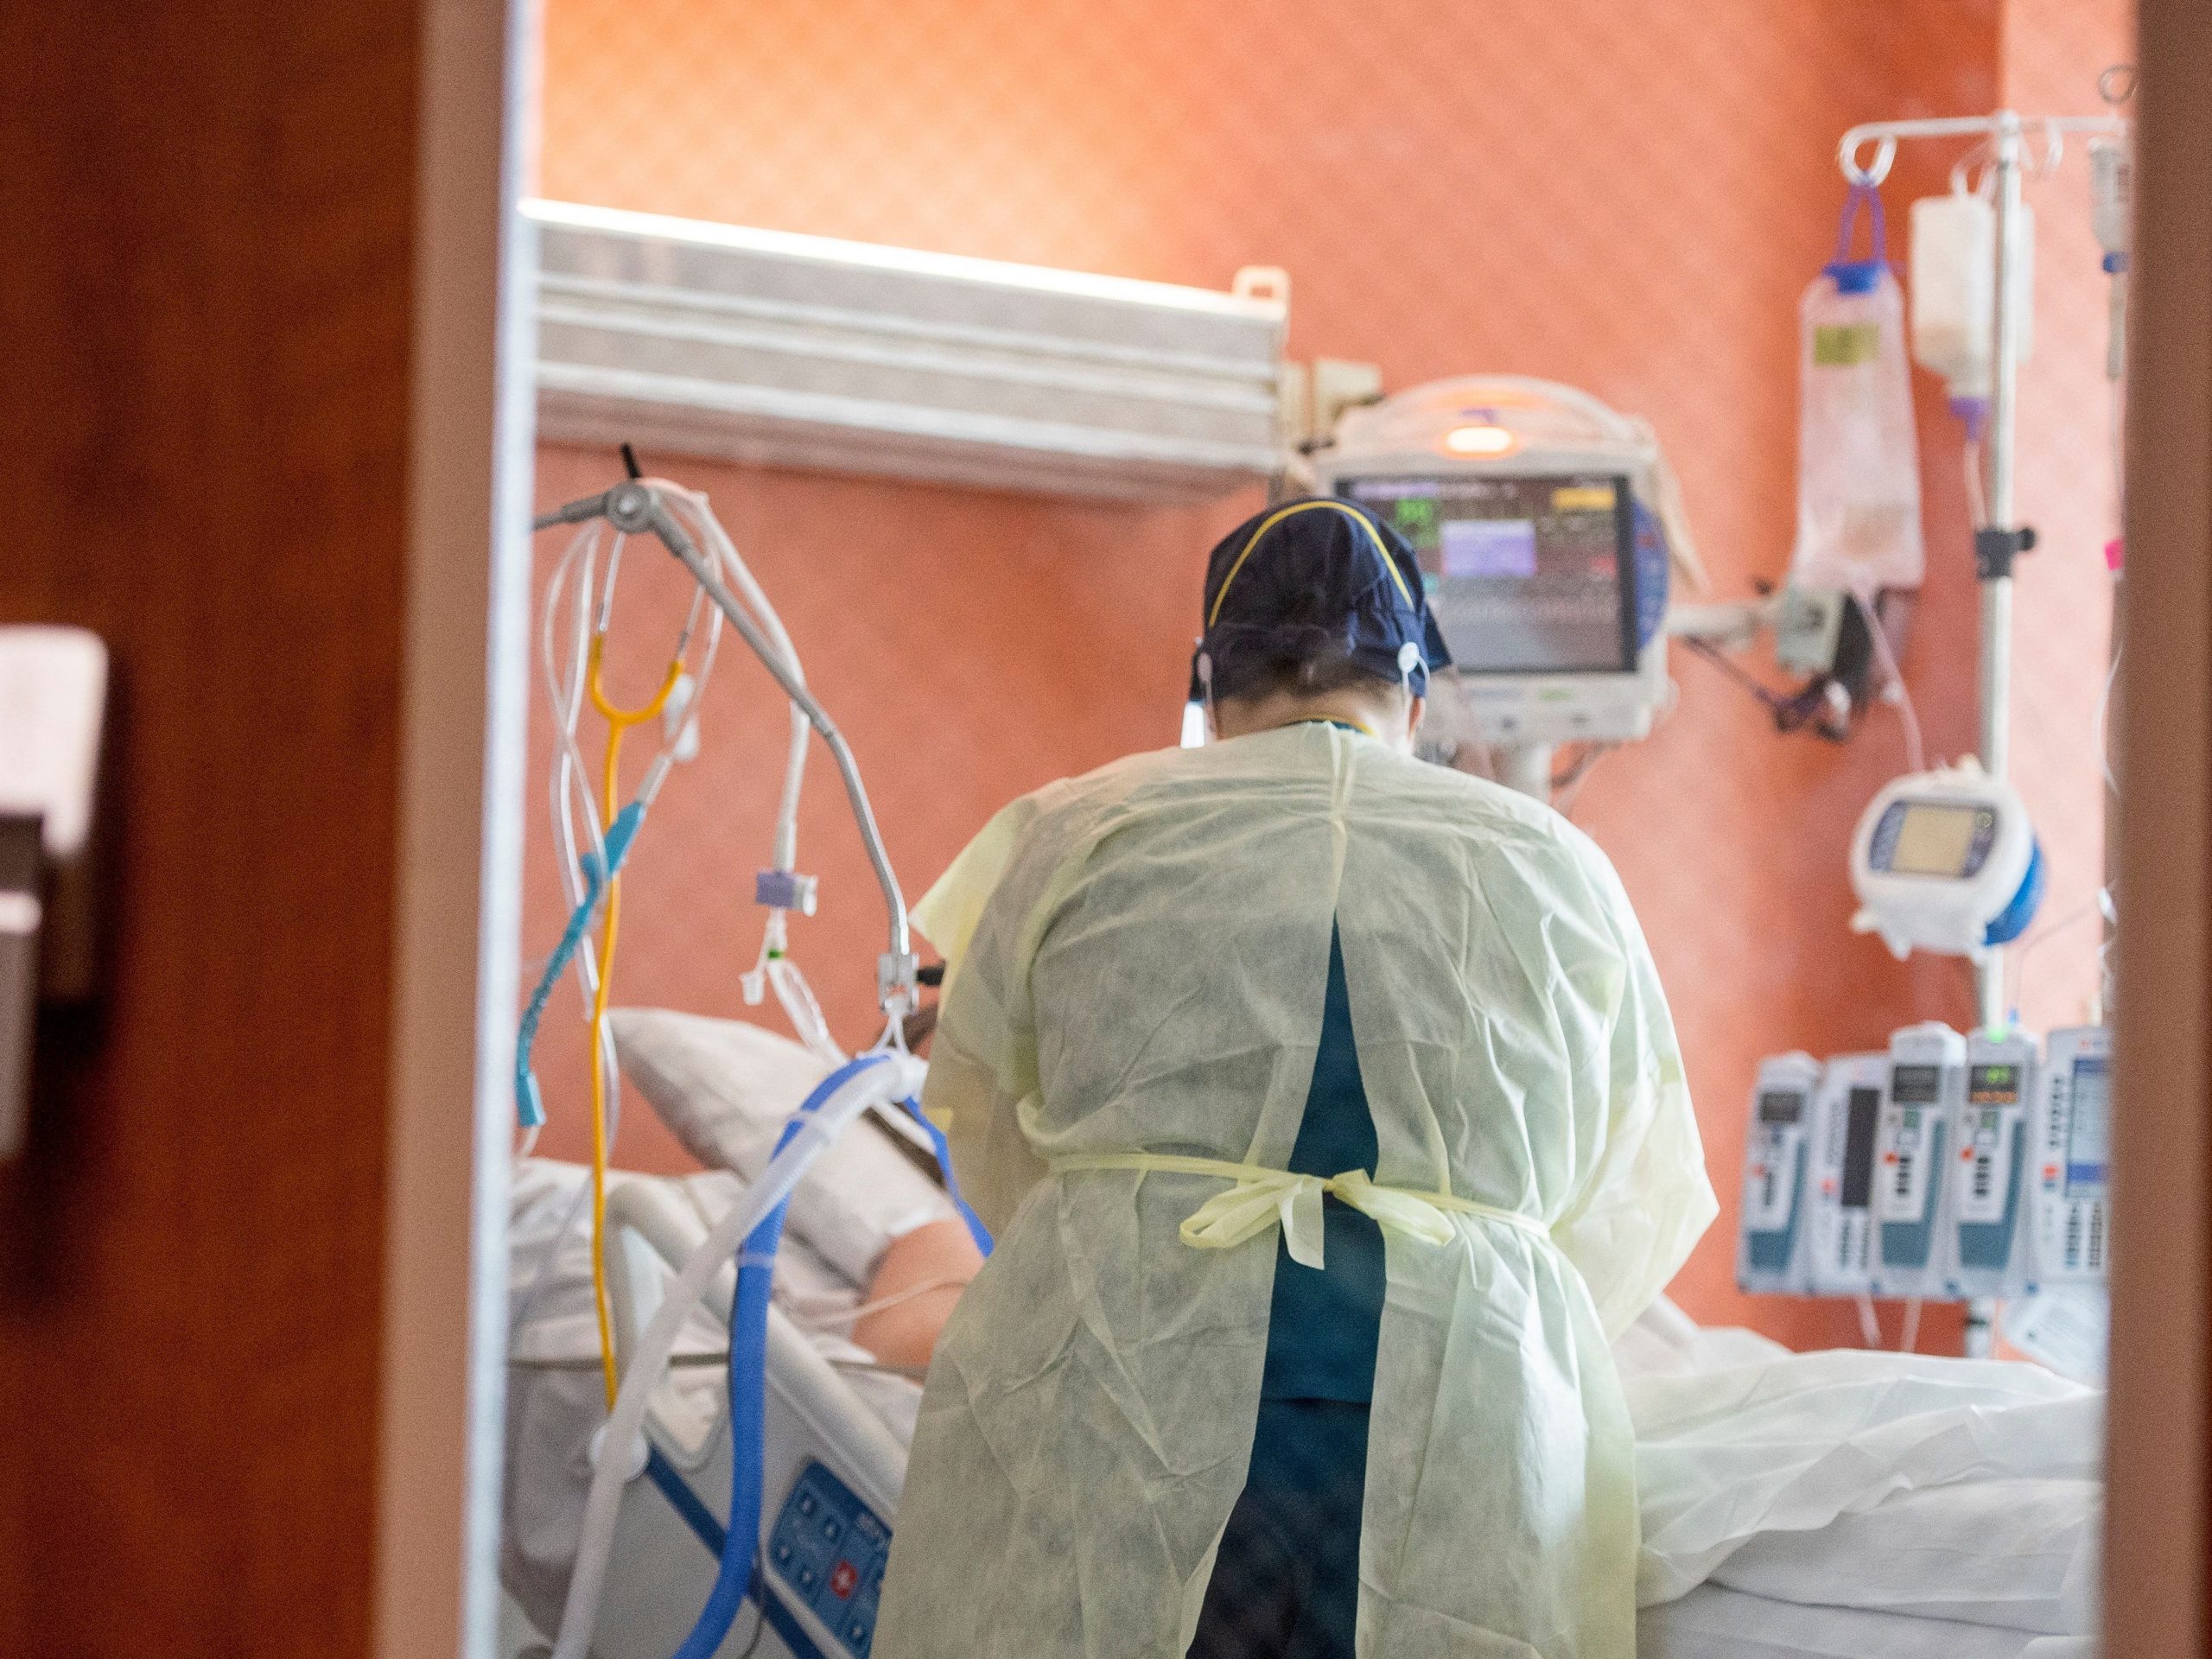 A nurse cares for a Covid-19 patient inside the ICU (intensive care unit) at Adventist Health in Sonora, California on August 27, 2021.